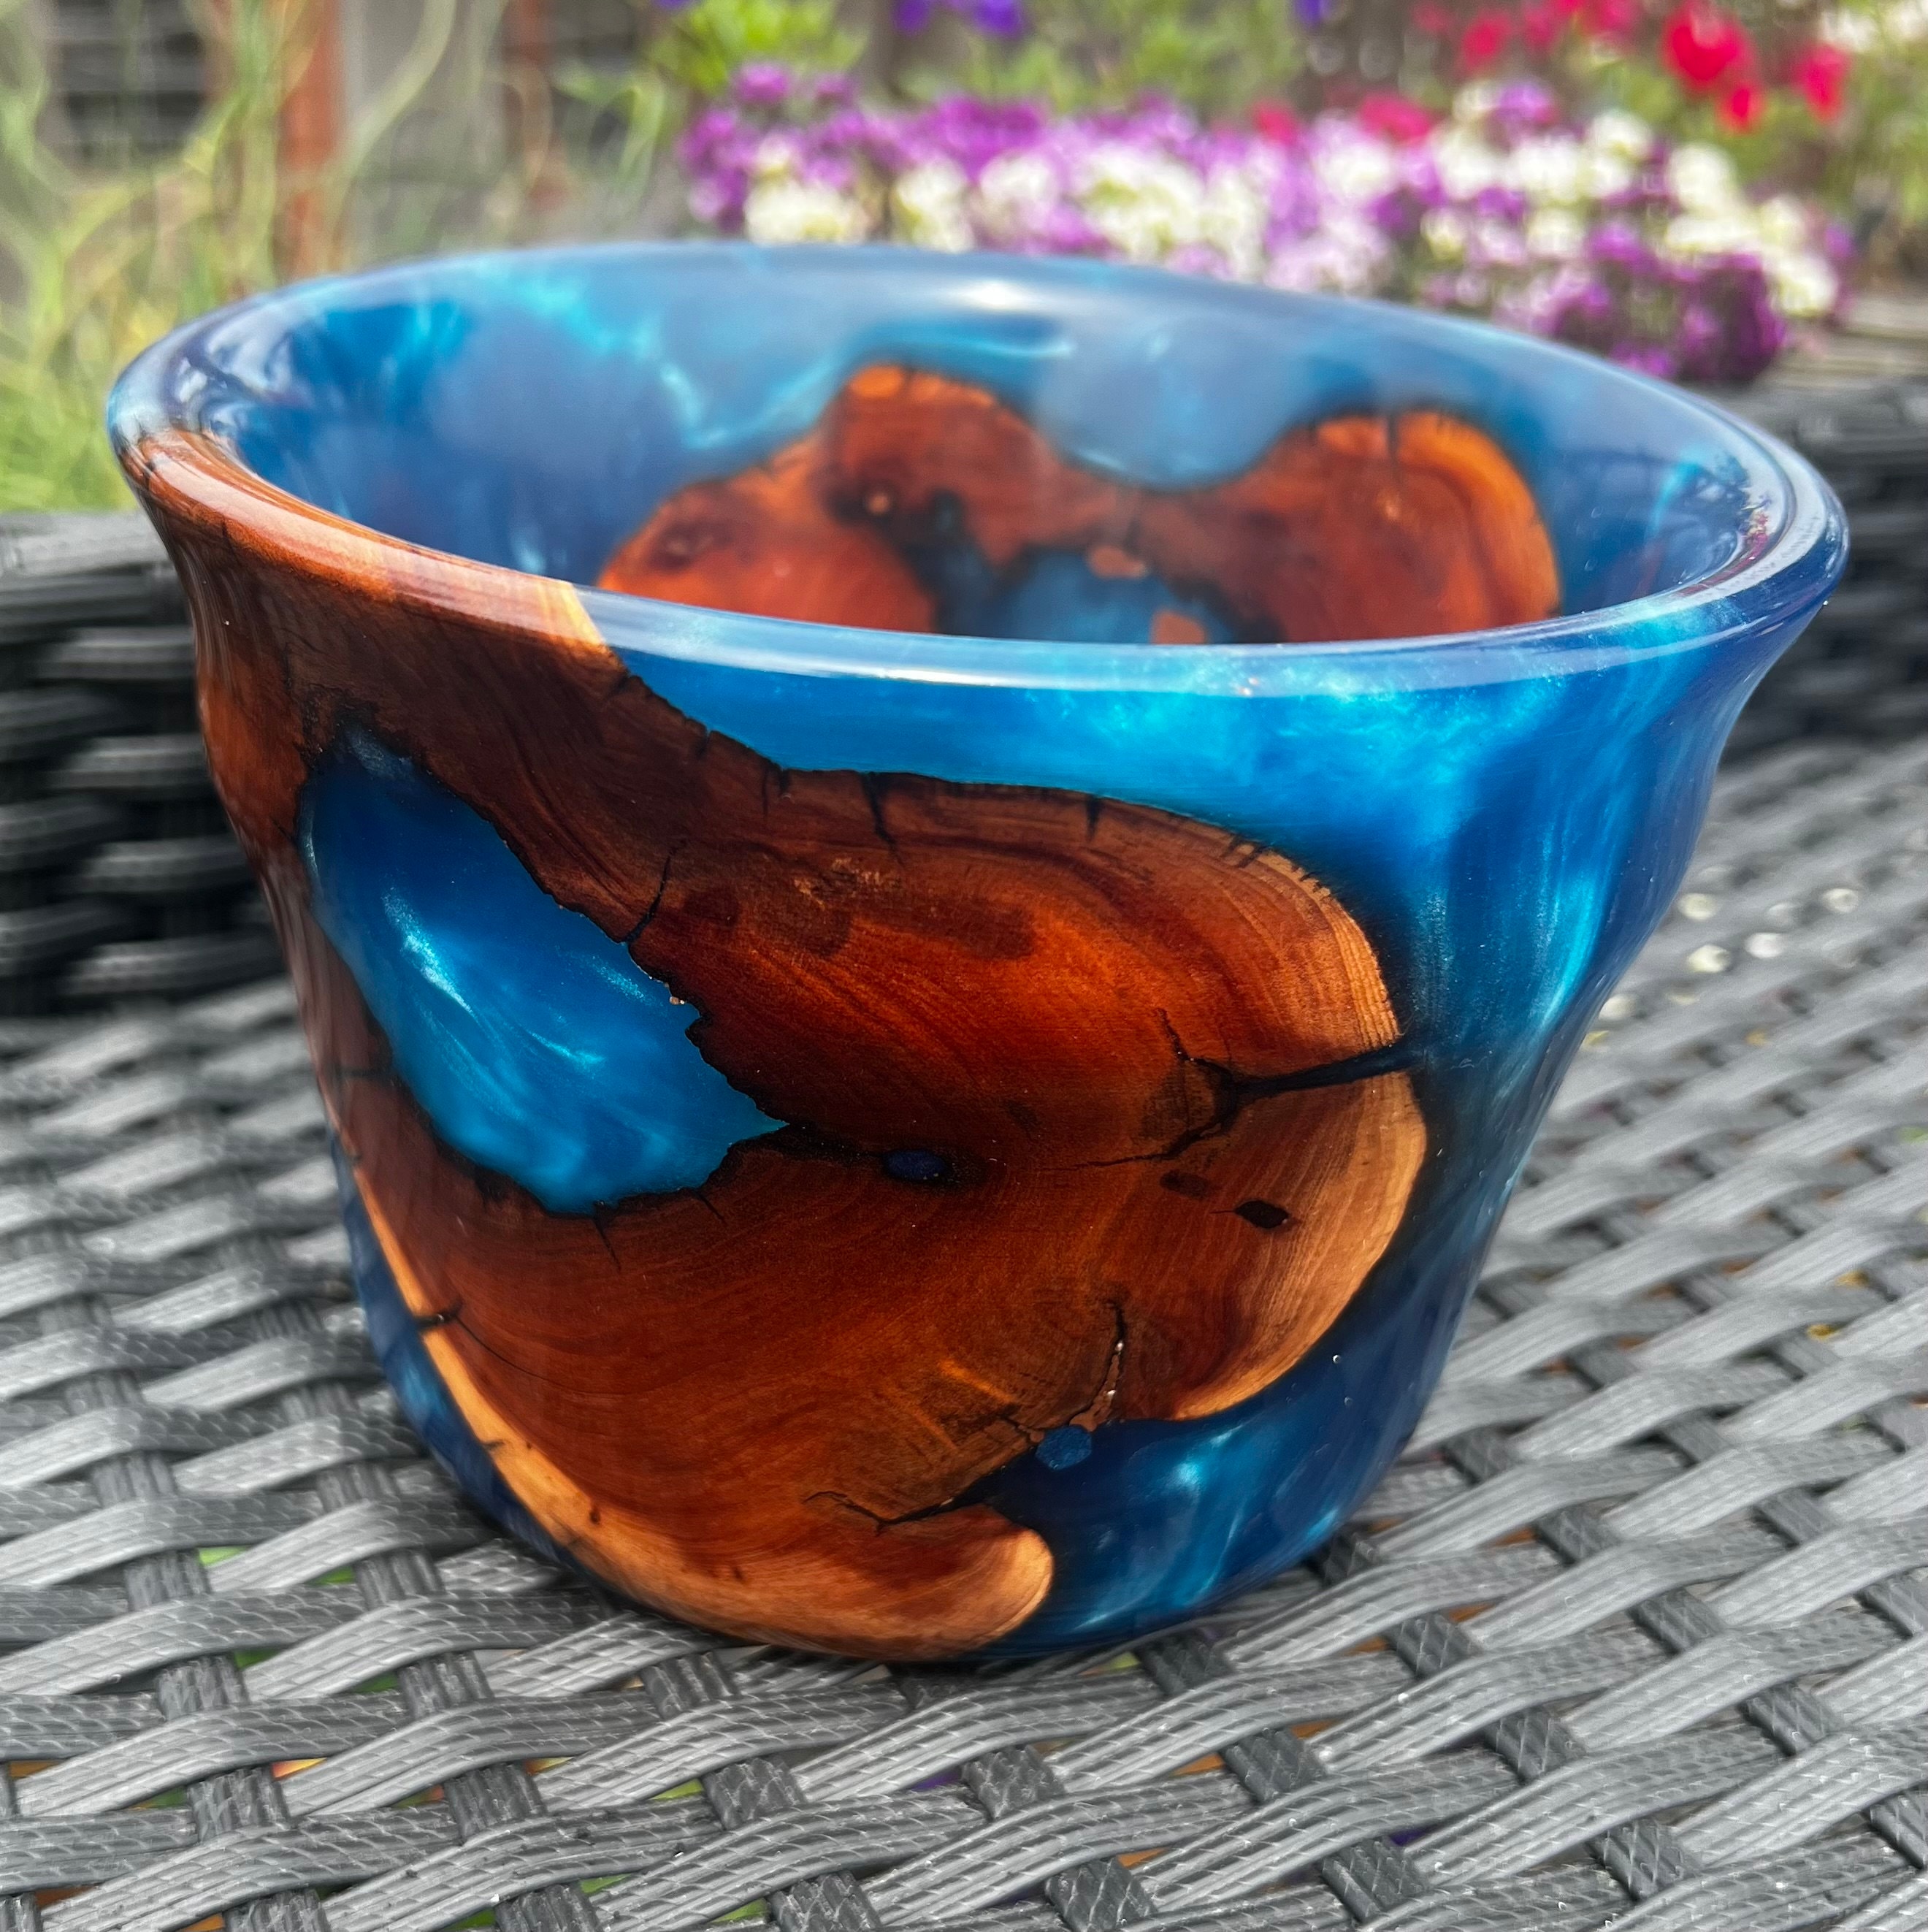 pecan wood bowl with electric blue epoxy resin inlay